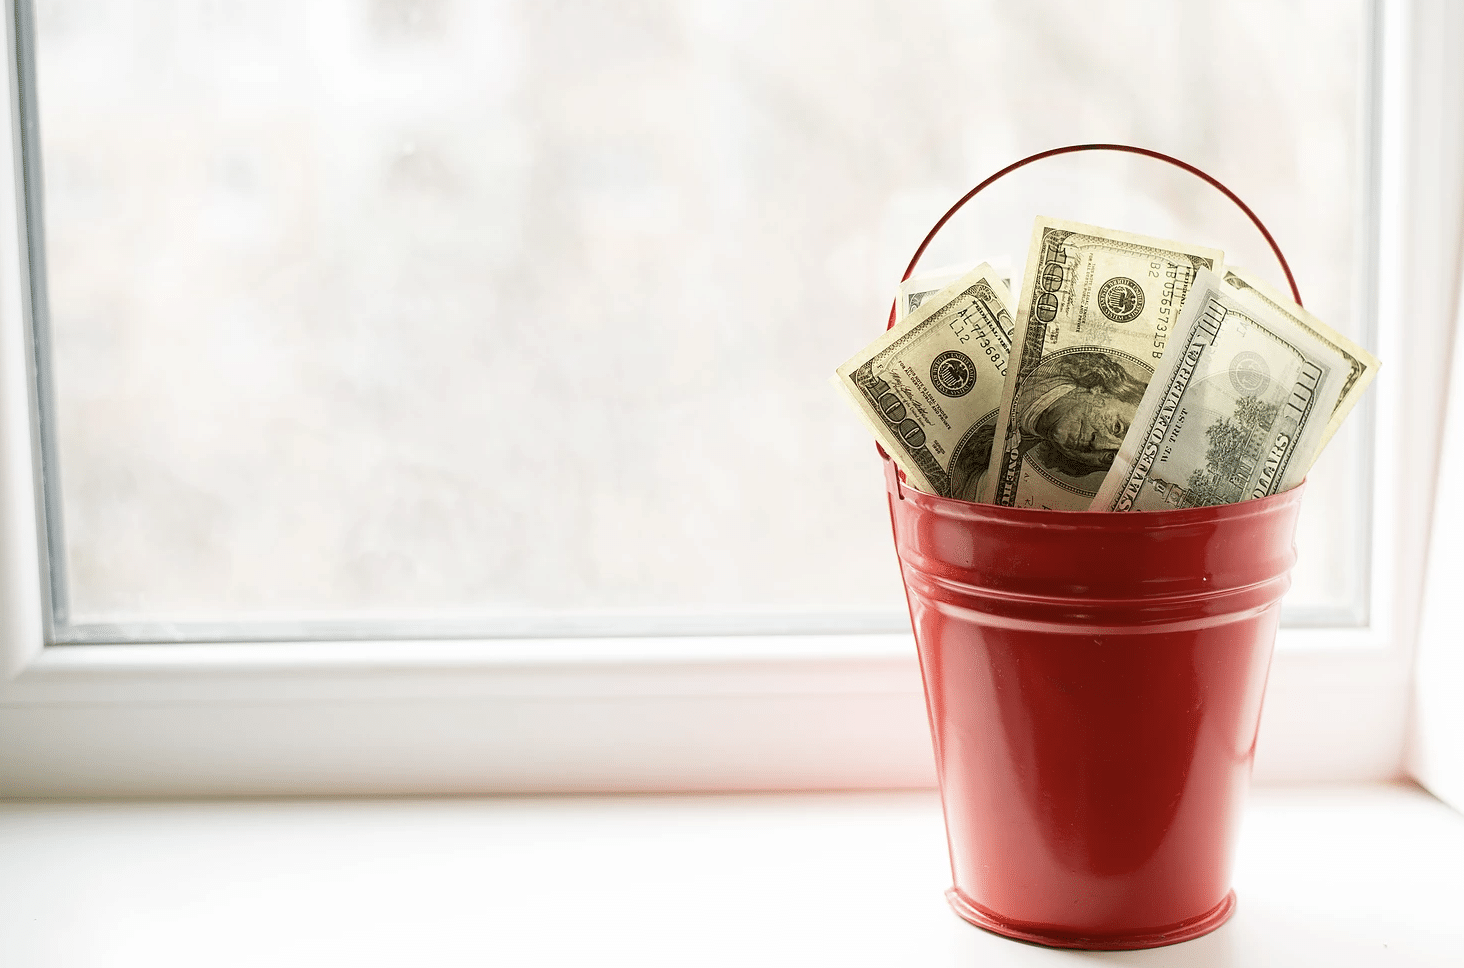 Red bucket filled with $100 bills